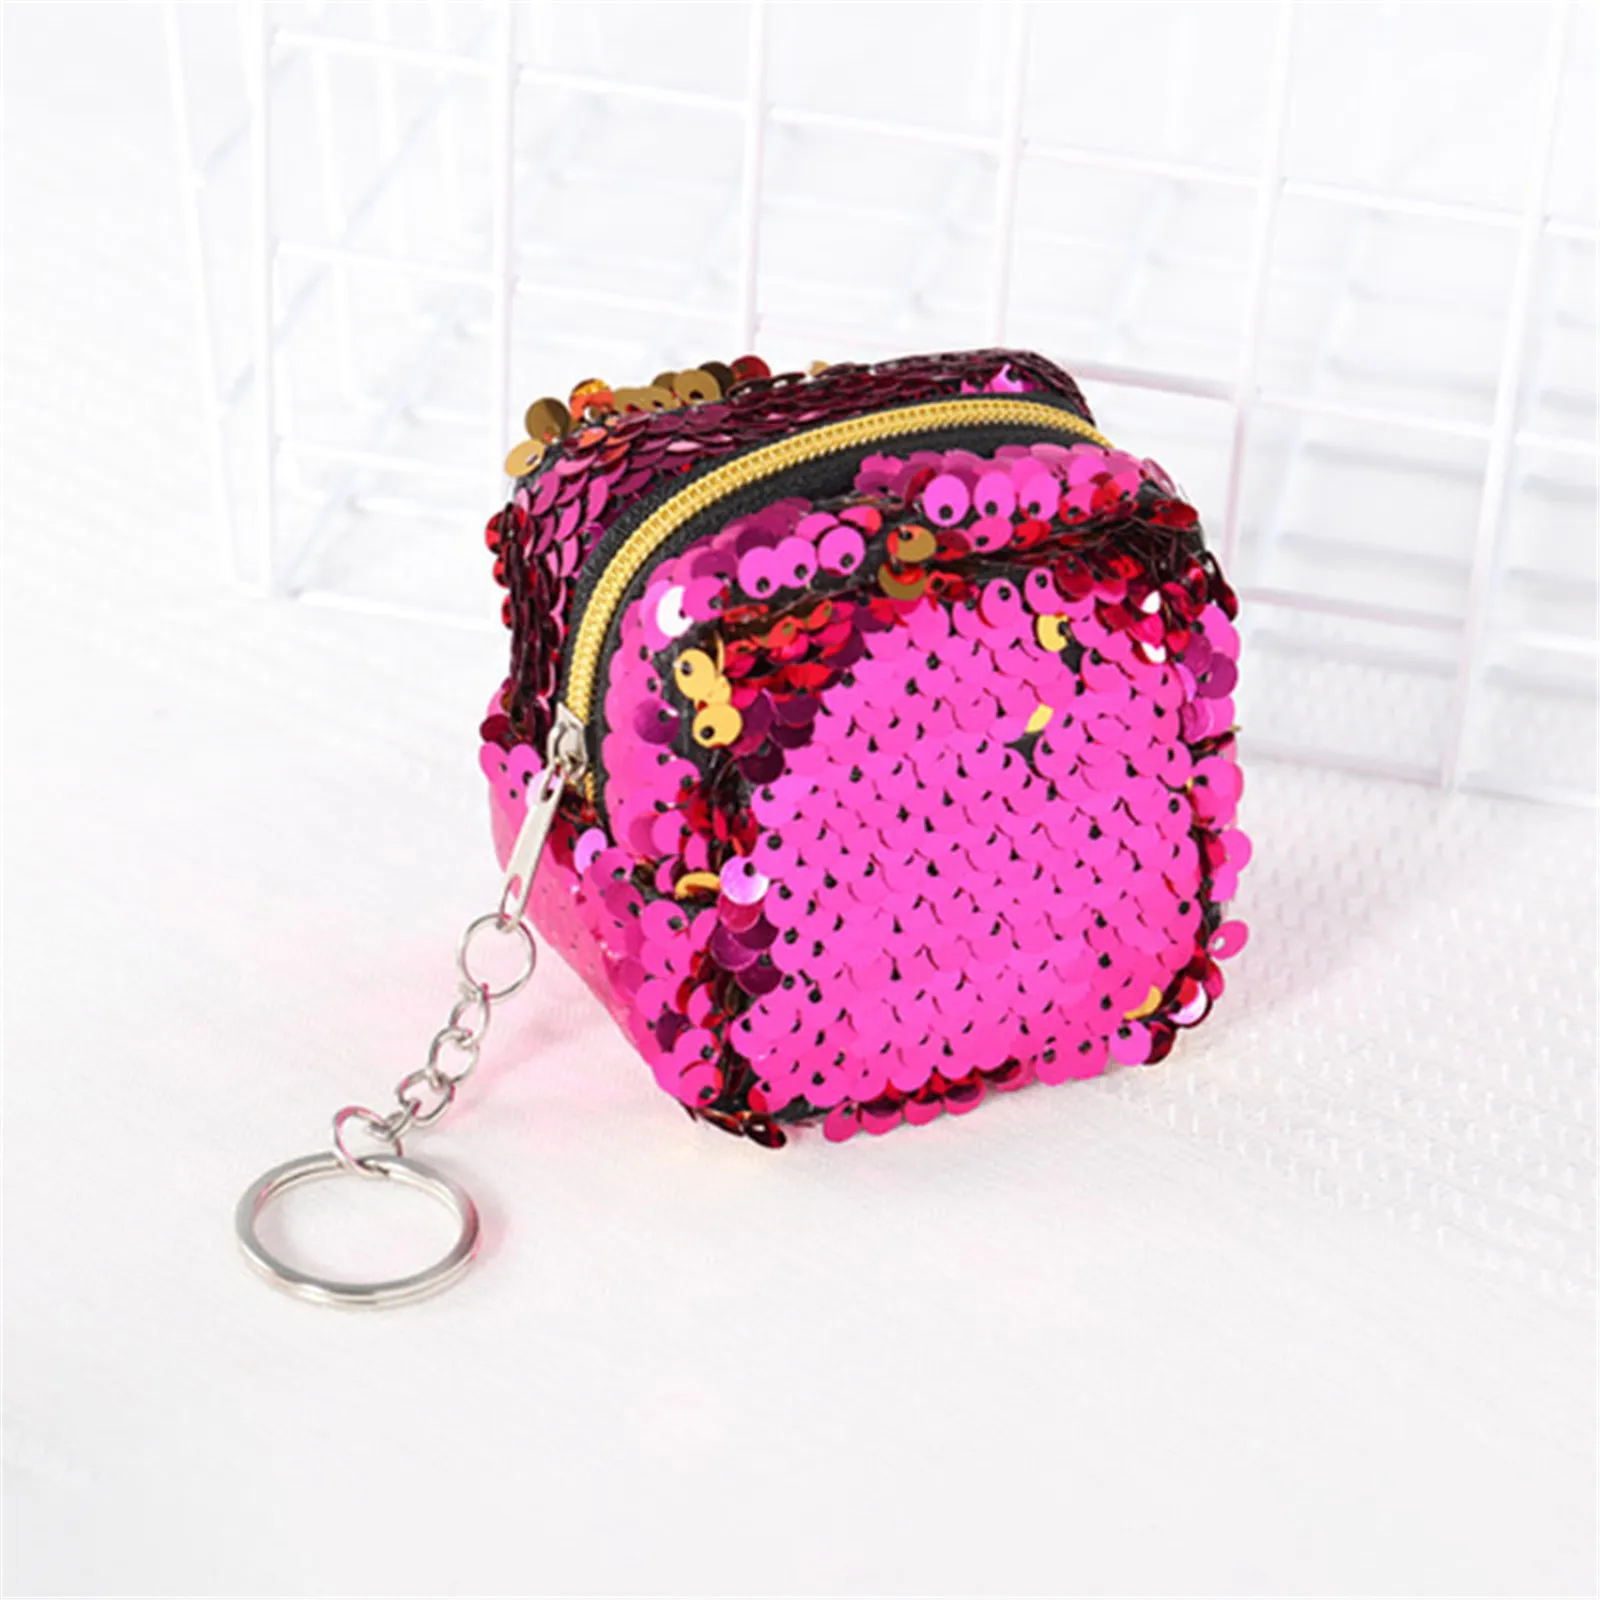 Juicy Couture Pink Sequin Backpack | Fancy purses, Sequin backpack, Juicy  couture pink